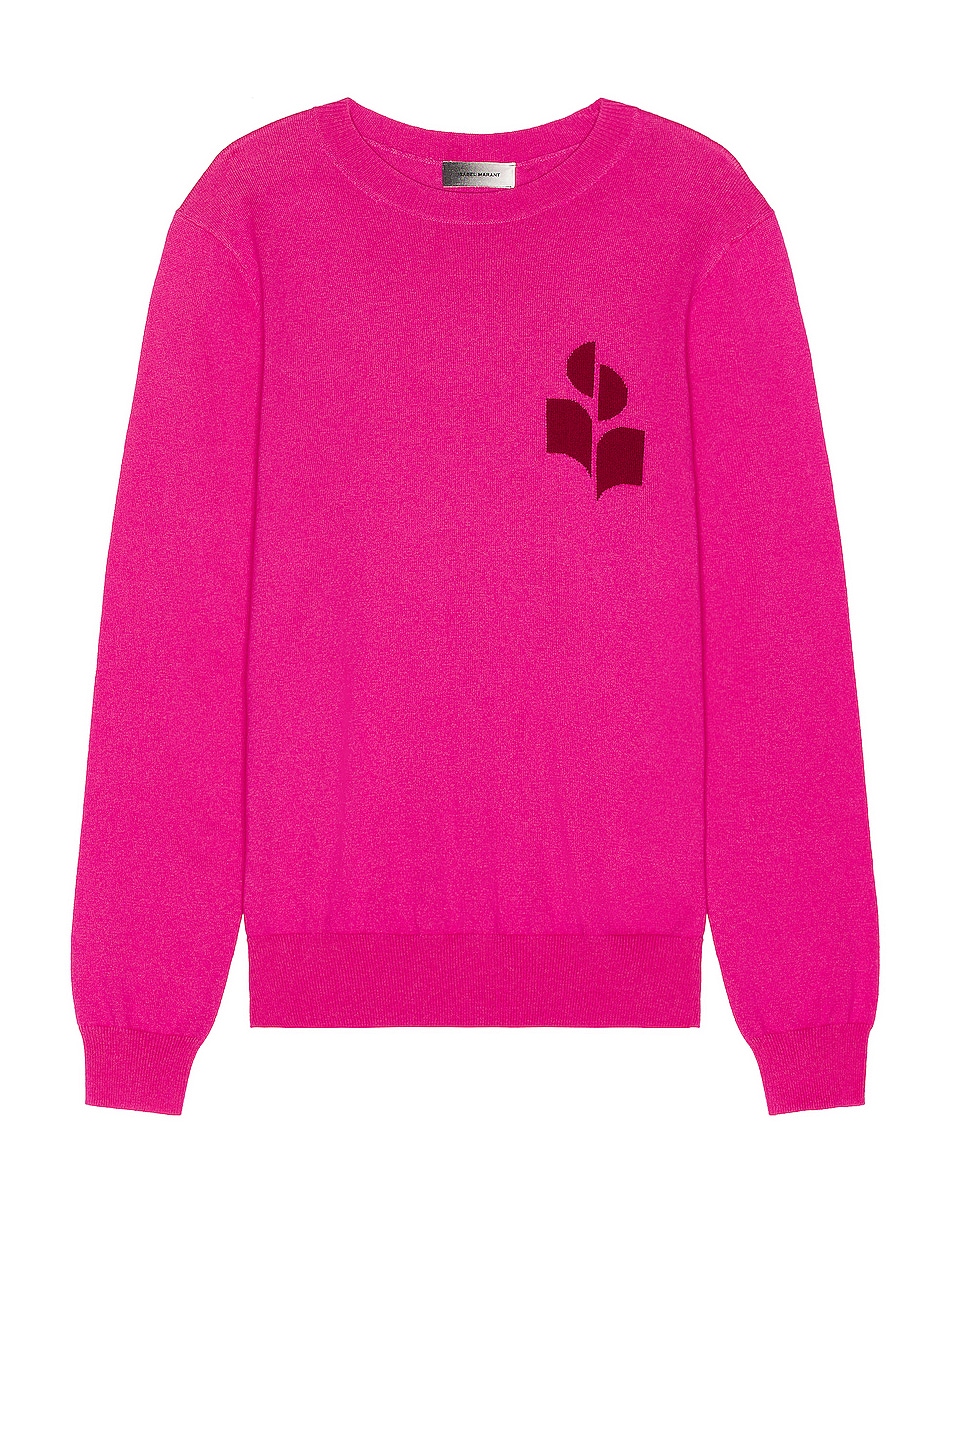 Image 1 of Isabel Marant Evans Iconic Sweater in Neon Pink